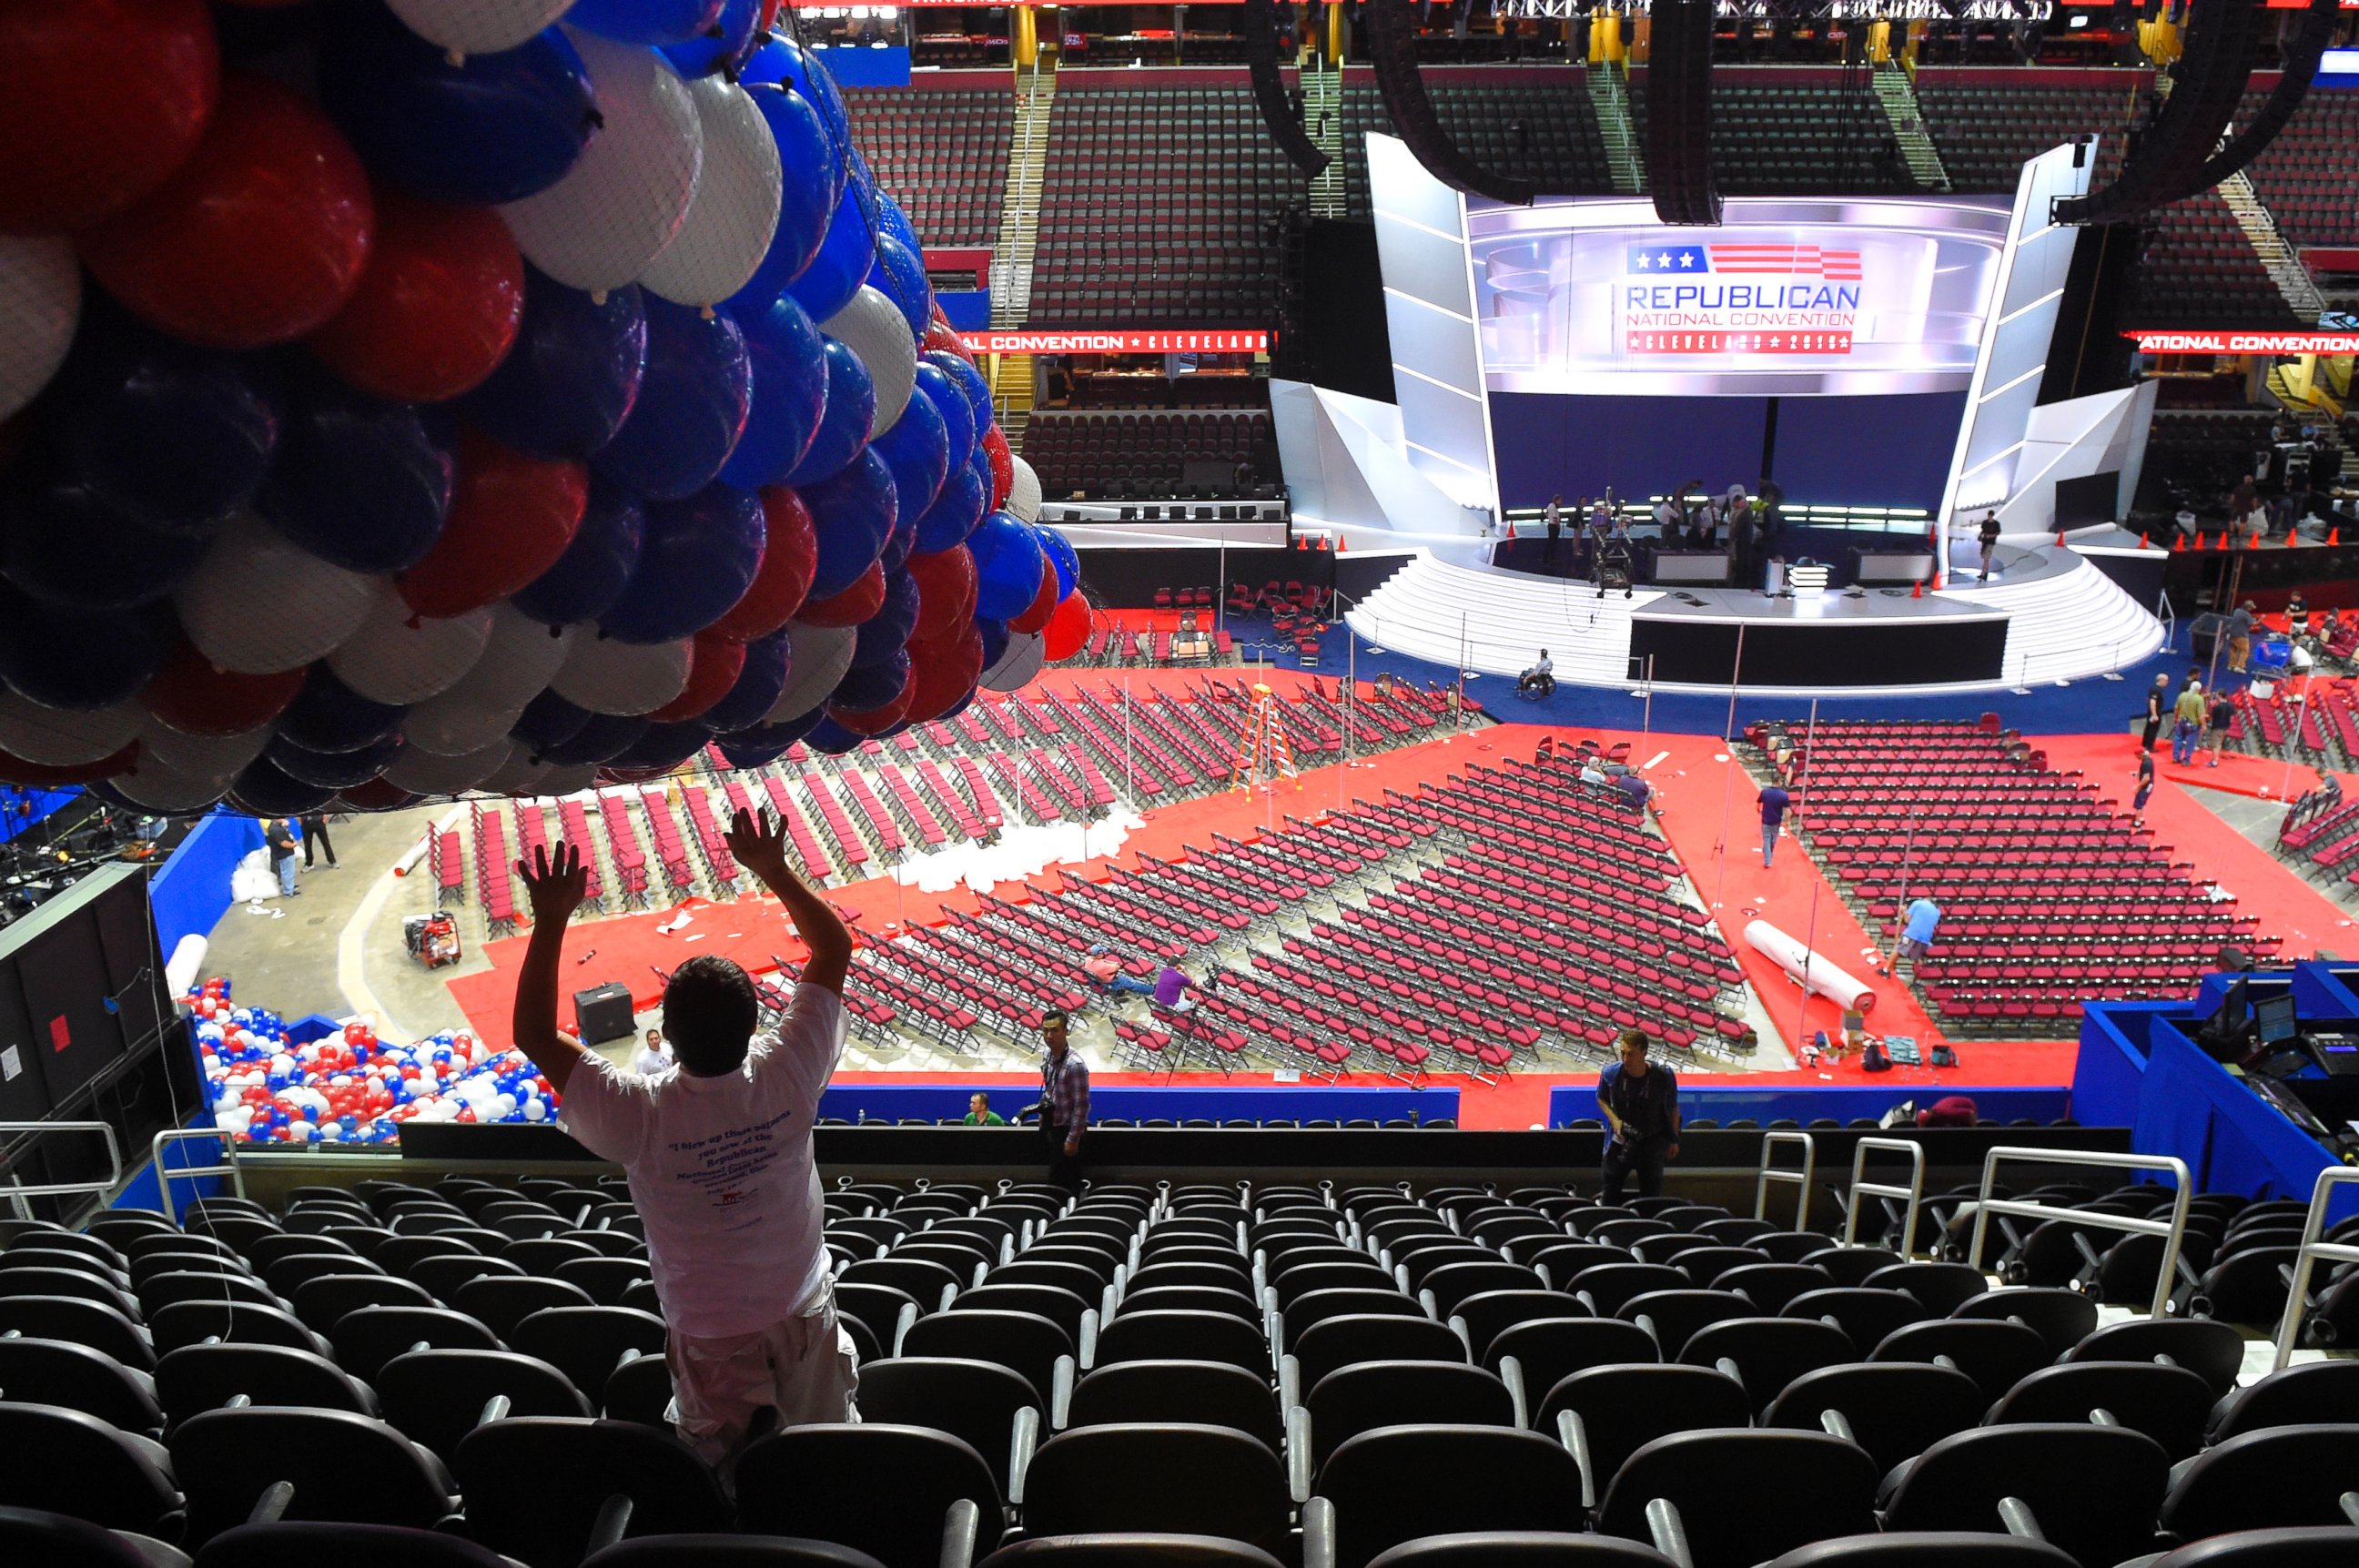 Republican Convention 2016 All Your Questions Answered